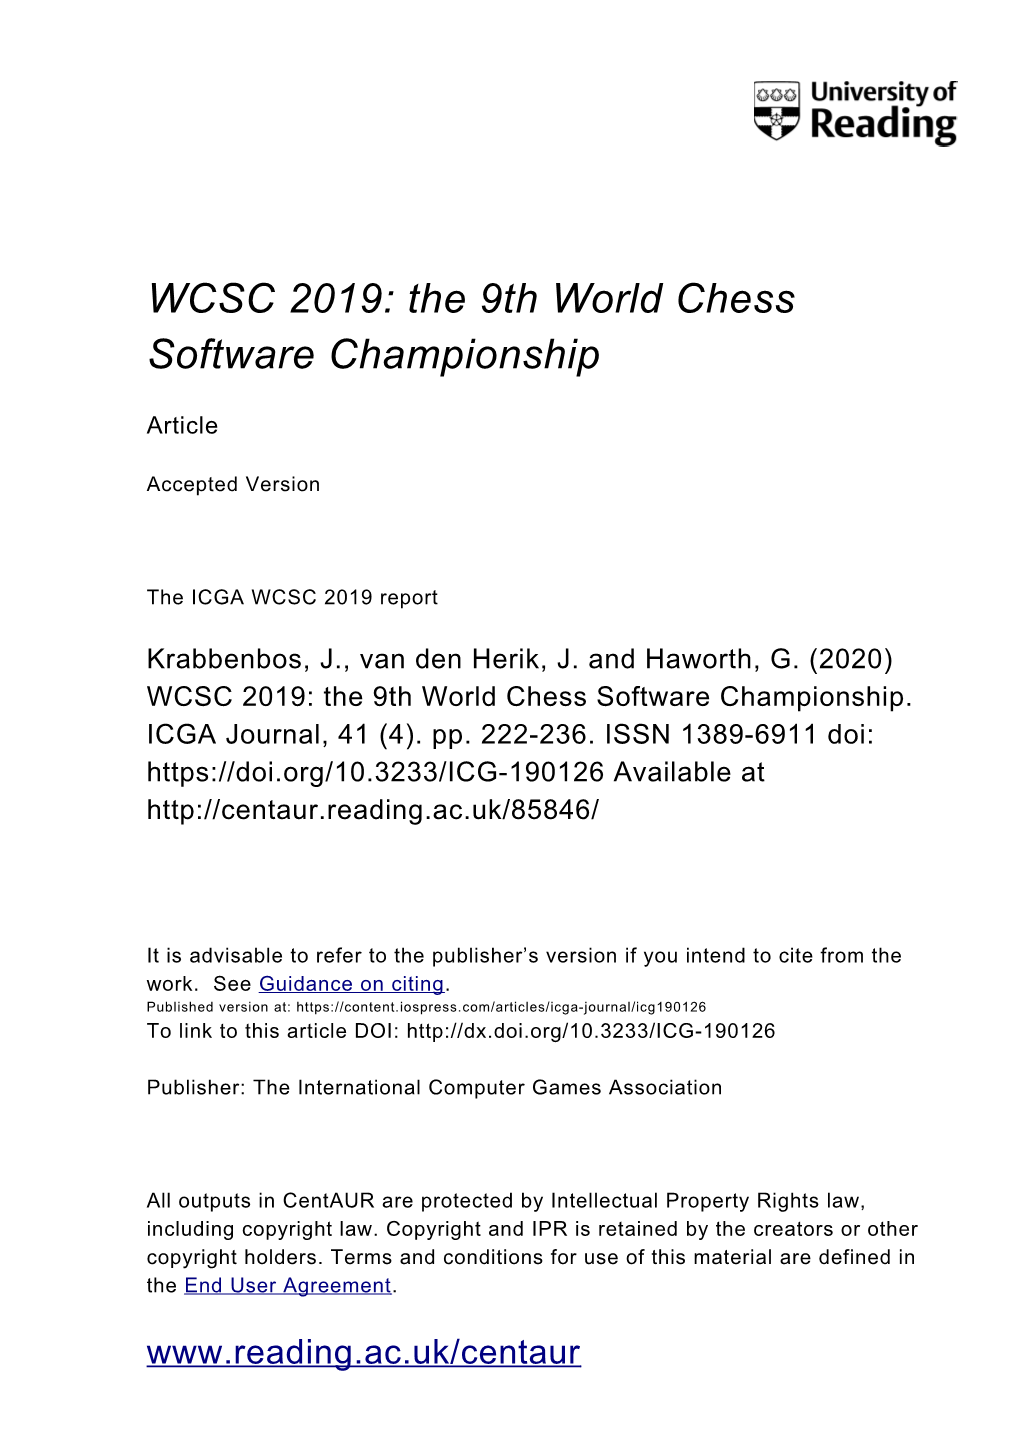 WCSC 2019: the 9Th World Chess Software Championship